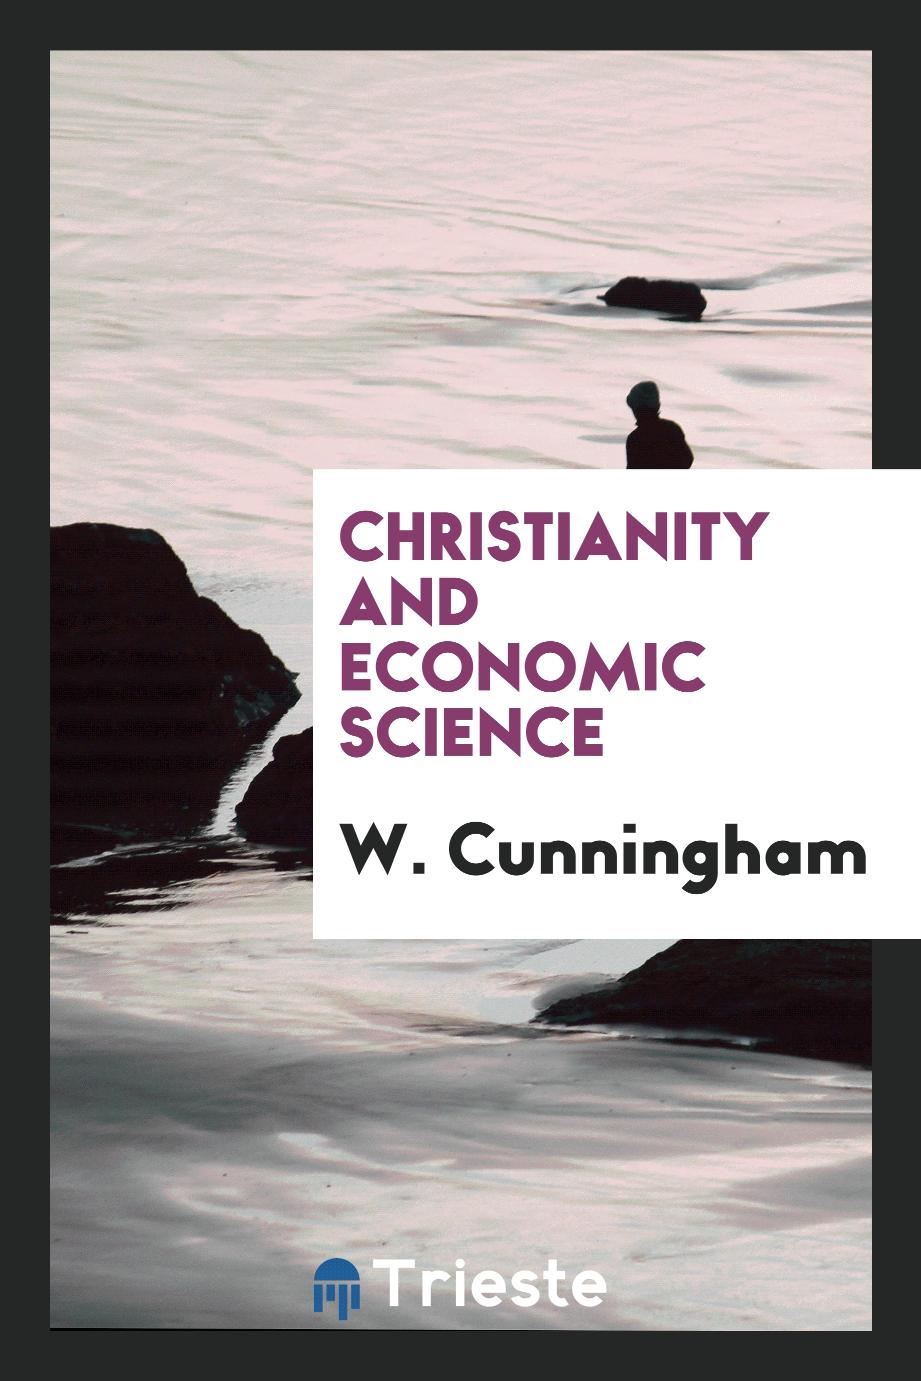 Christianity and economic science